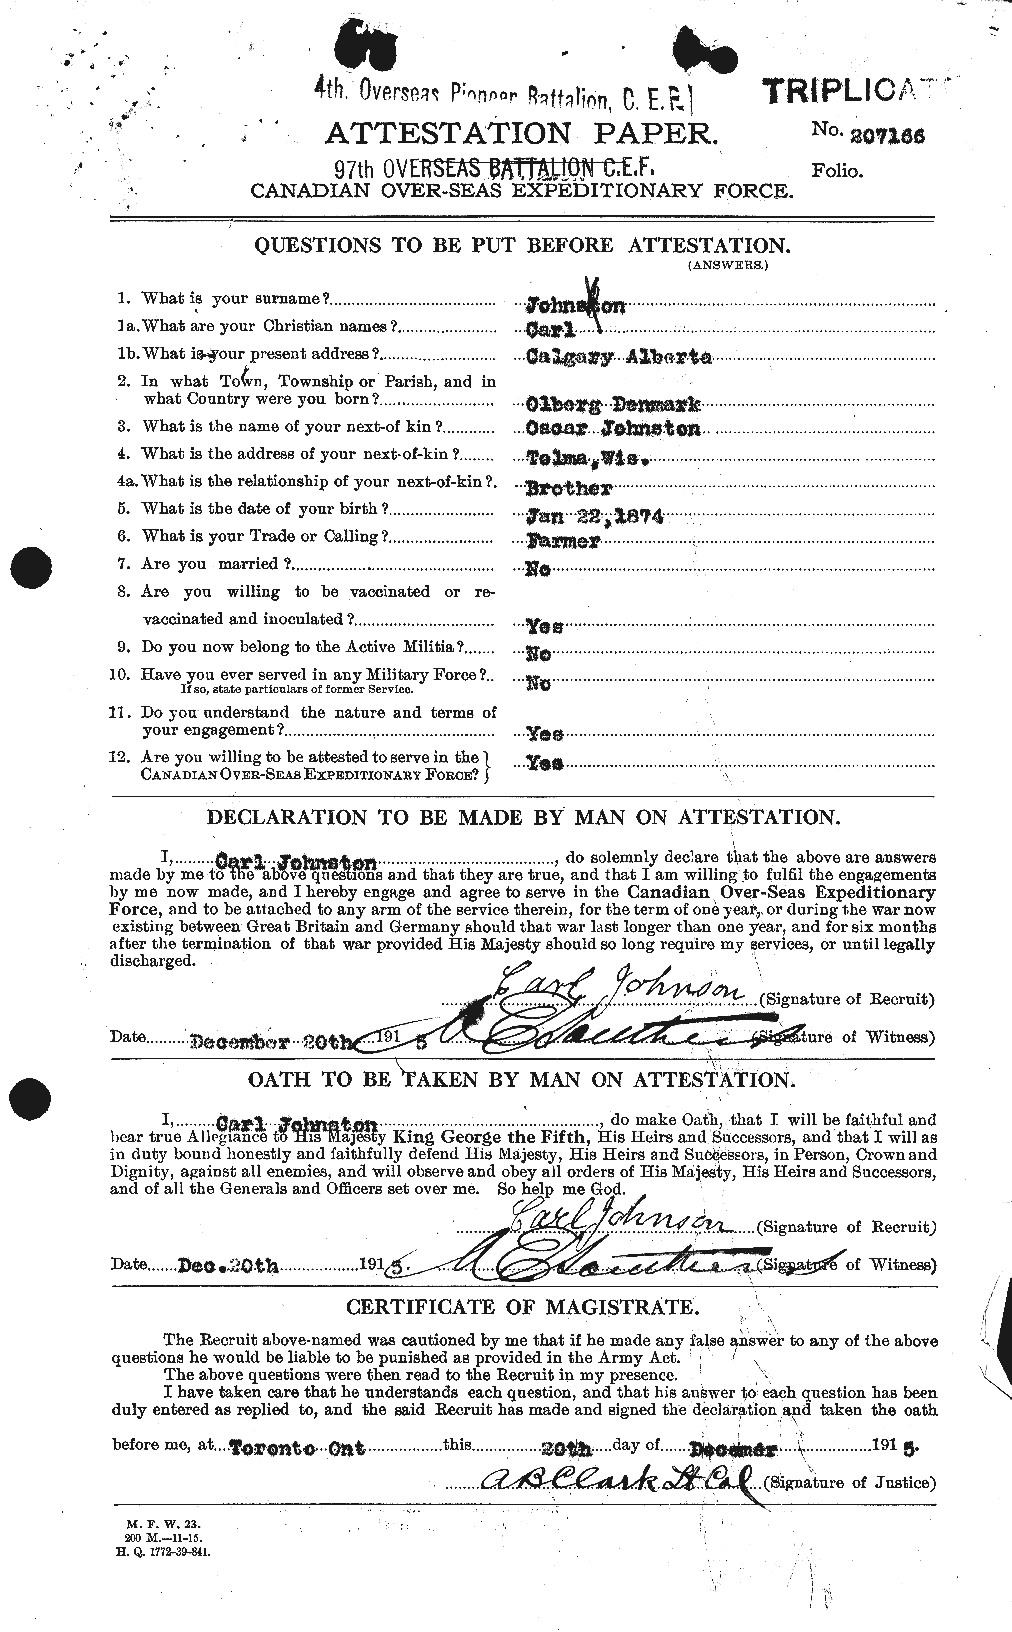 Personnel Records of the First World War - CEF 421338a